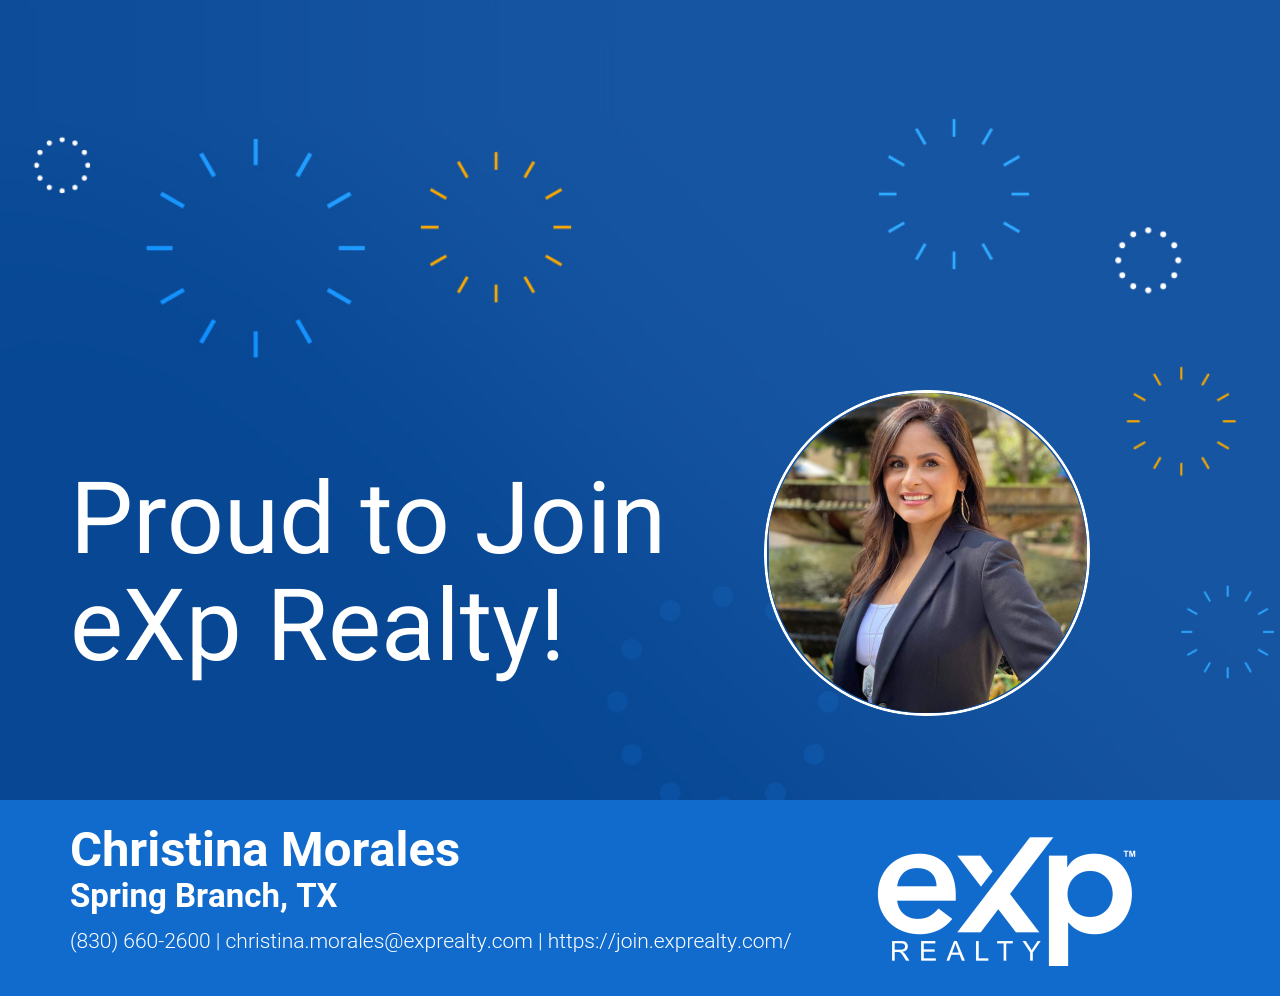 eXp Realty Welcomes Christina Morales!